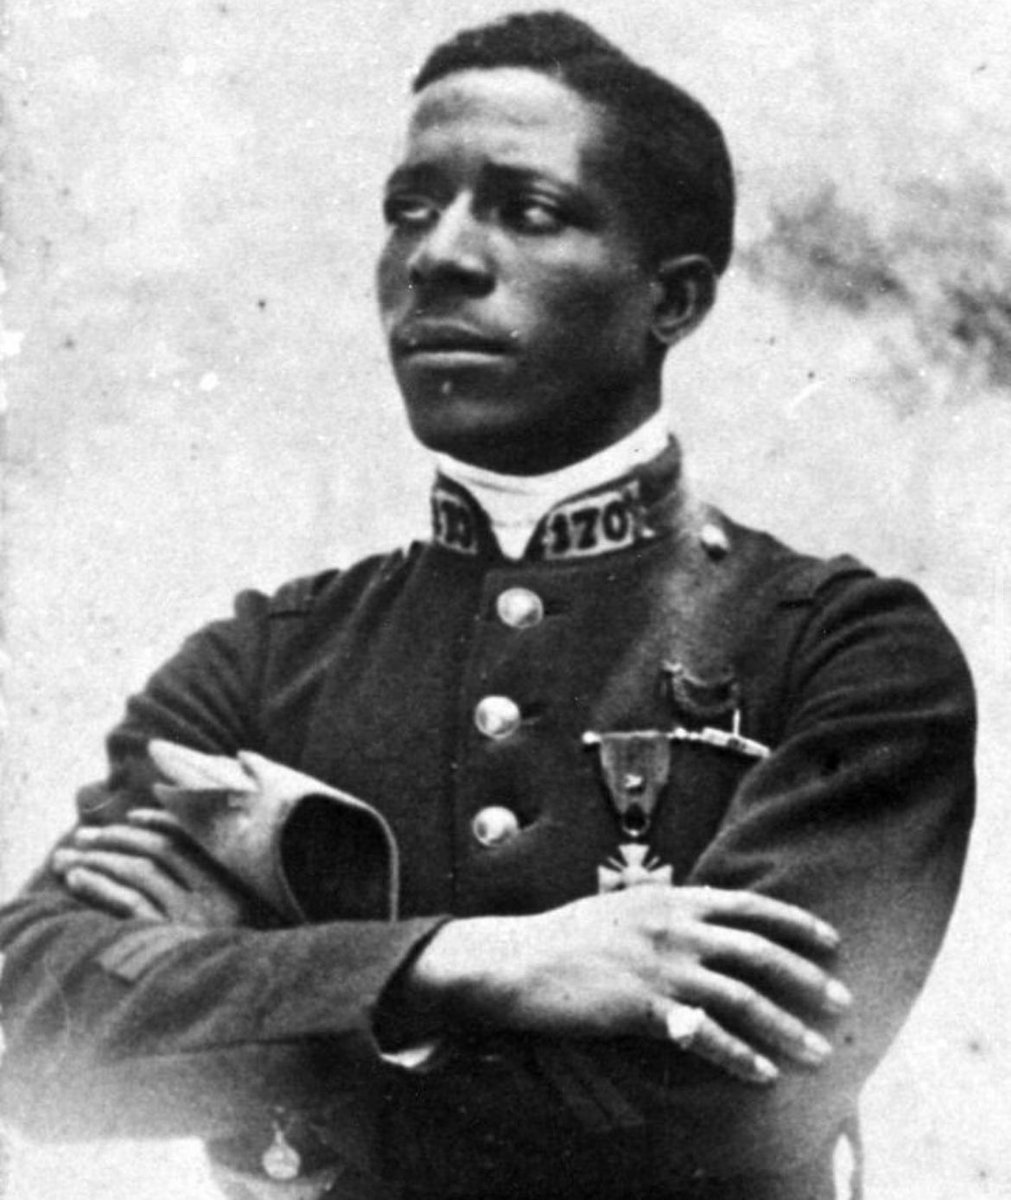 Sick of American racism, Eugene Bullard snuck onto a German freighter in 1912 and started a new life in Europe. By the time WWI broke out, he was living in France and eagerly signed up to join the army of his adopted country. He then became the first Black American fighter pilot,…